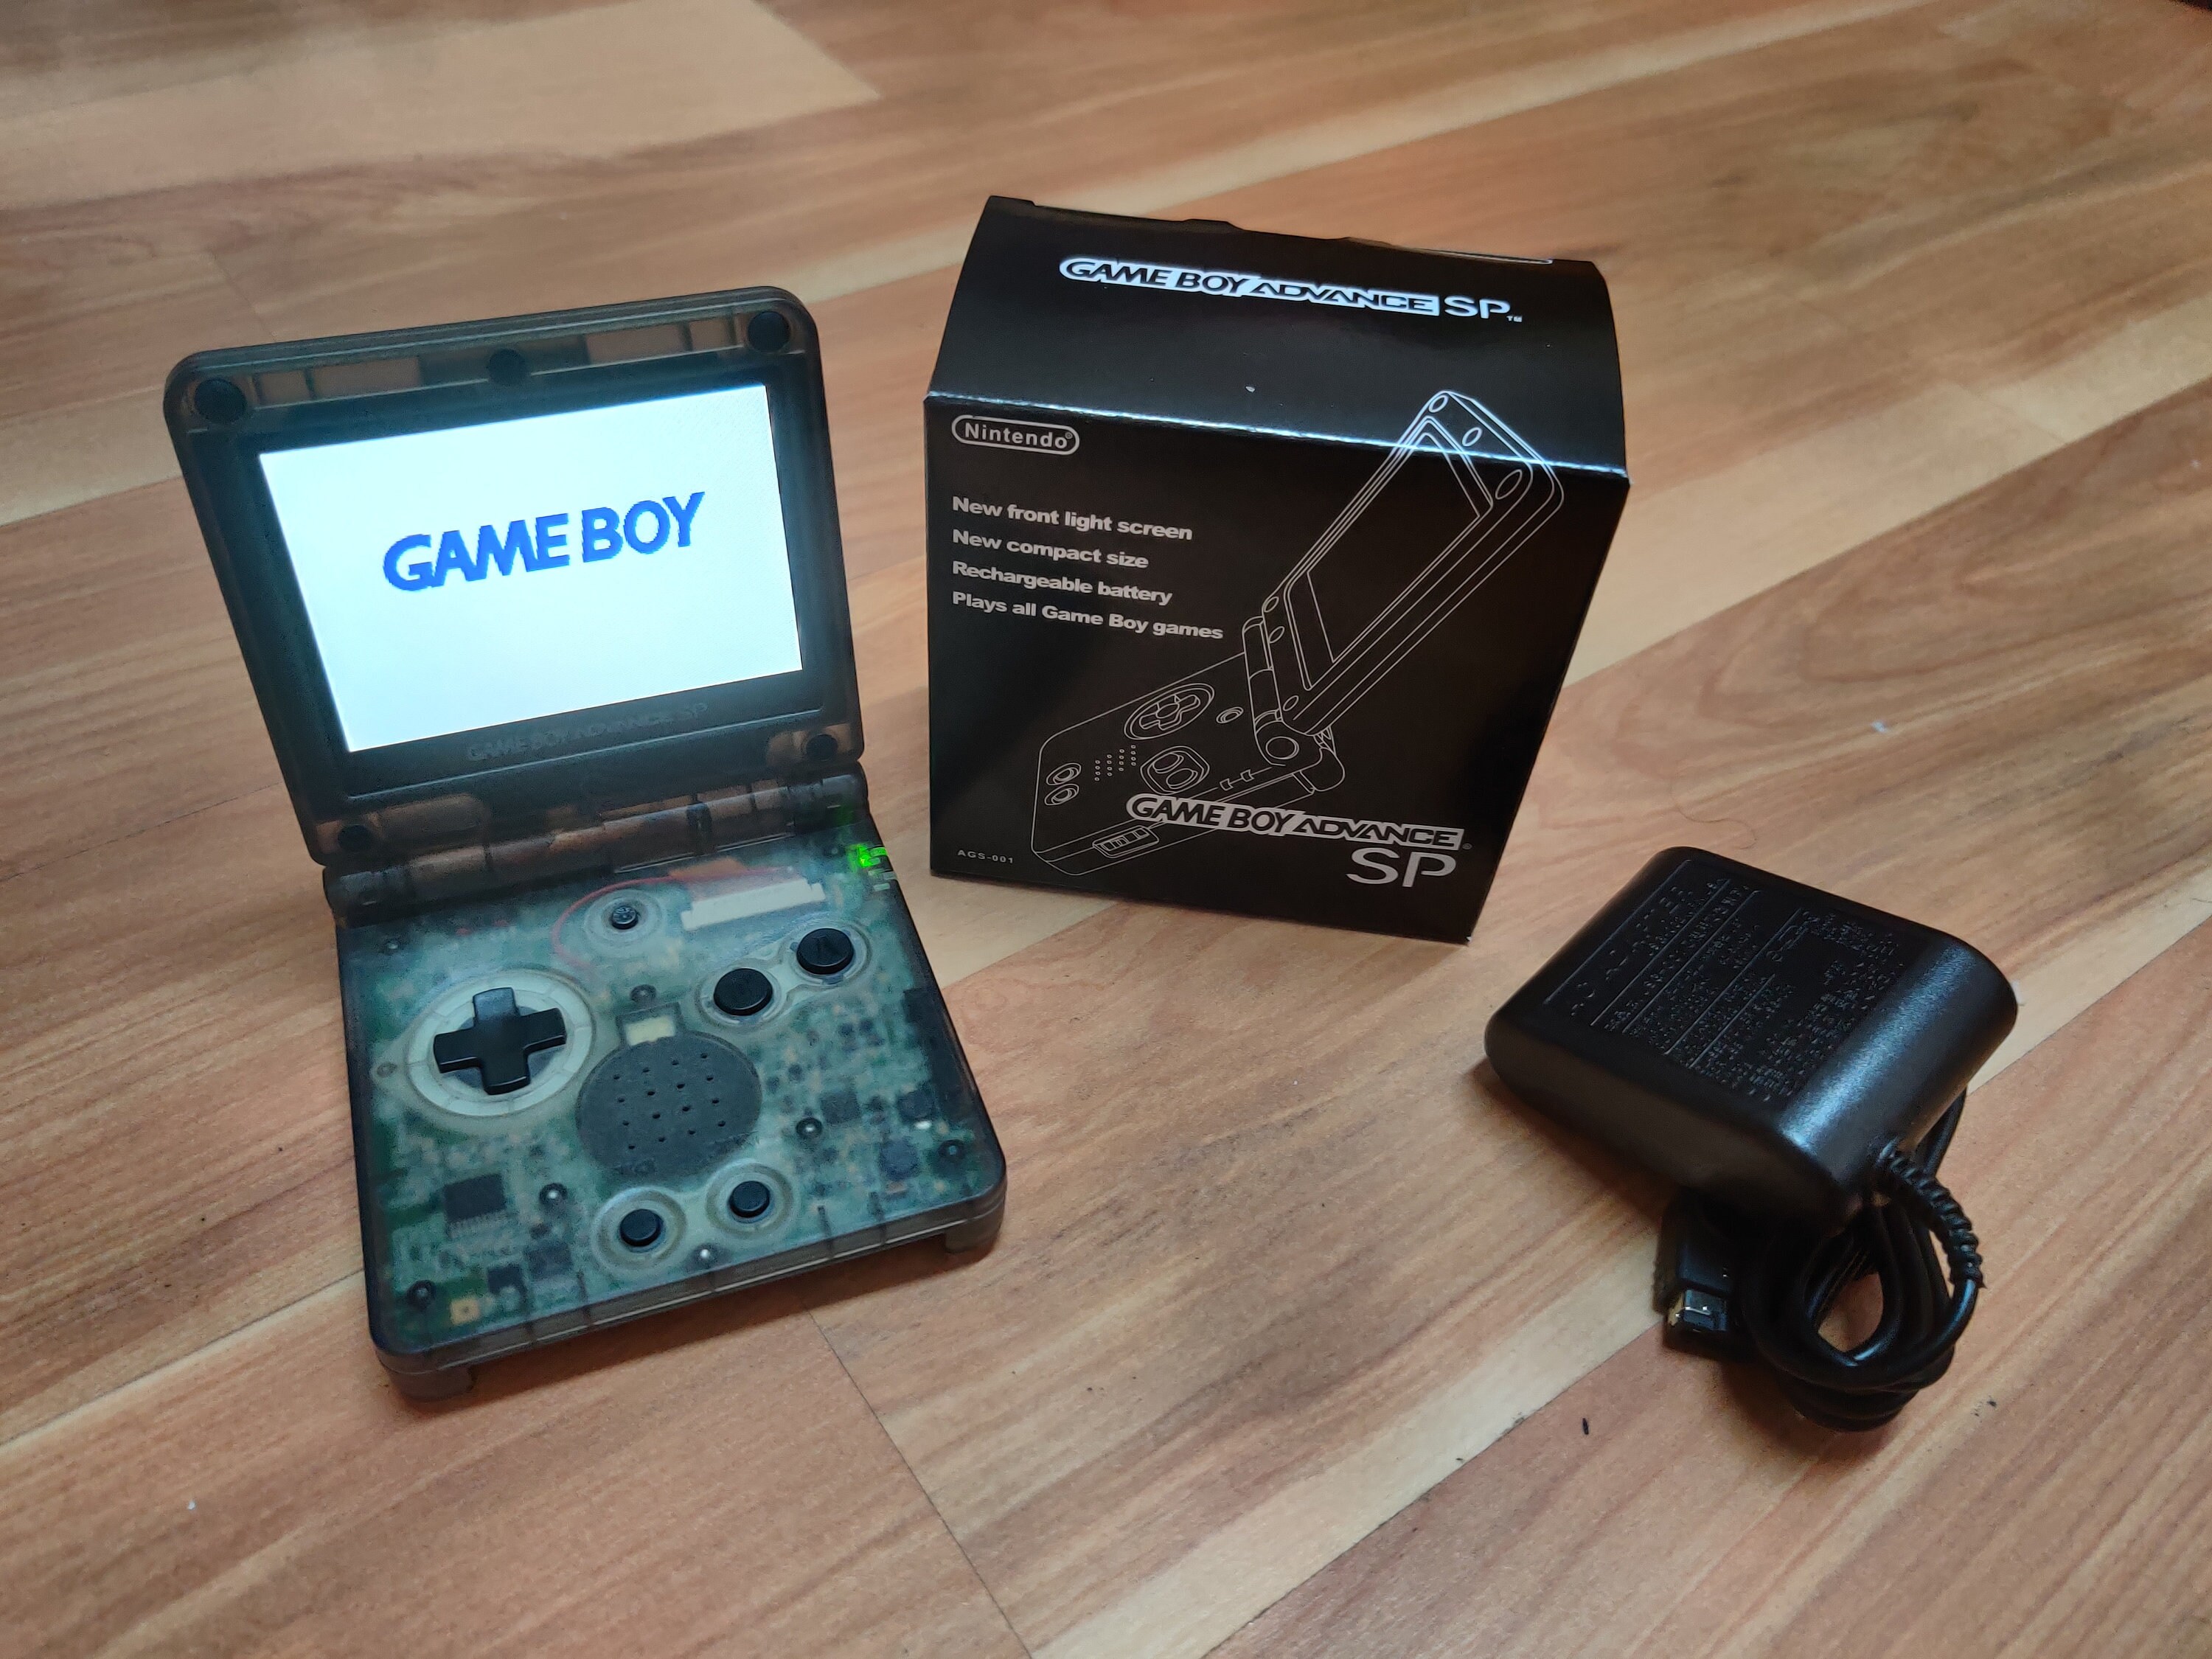 Gameboy Advance Style Emulator Handheld Console - 5000+ Pre-Installed Games!